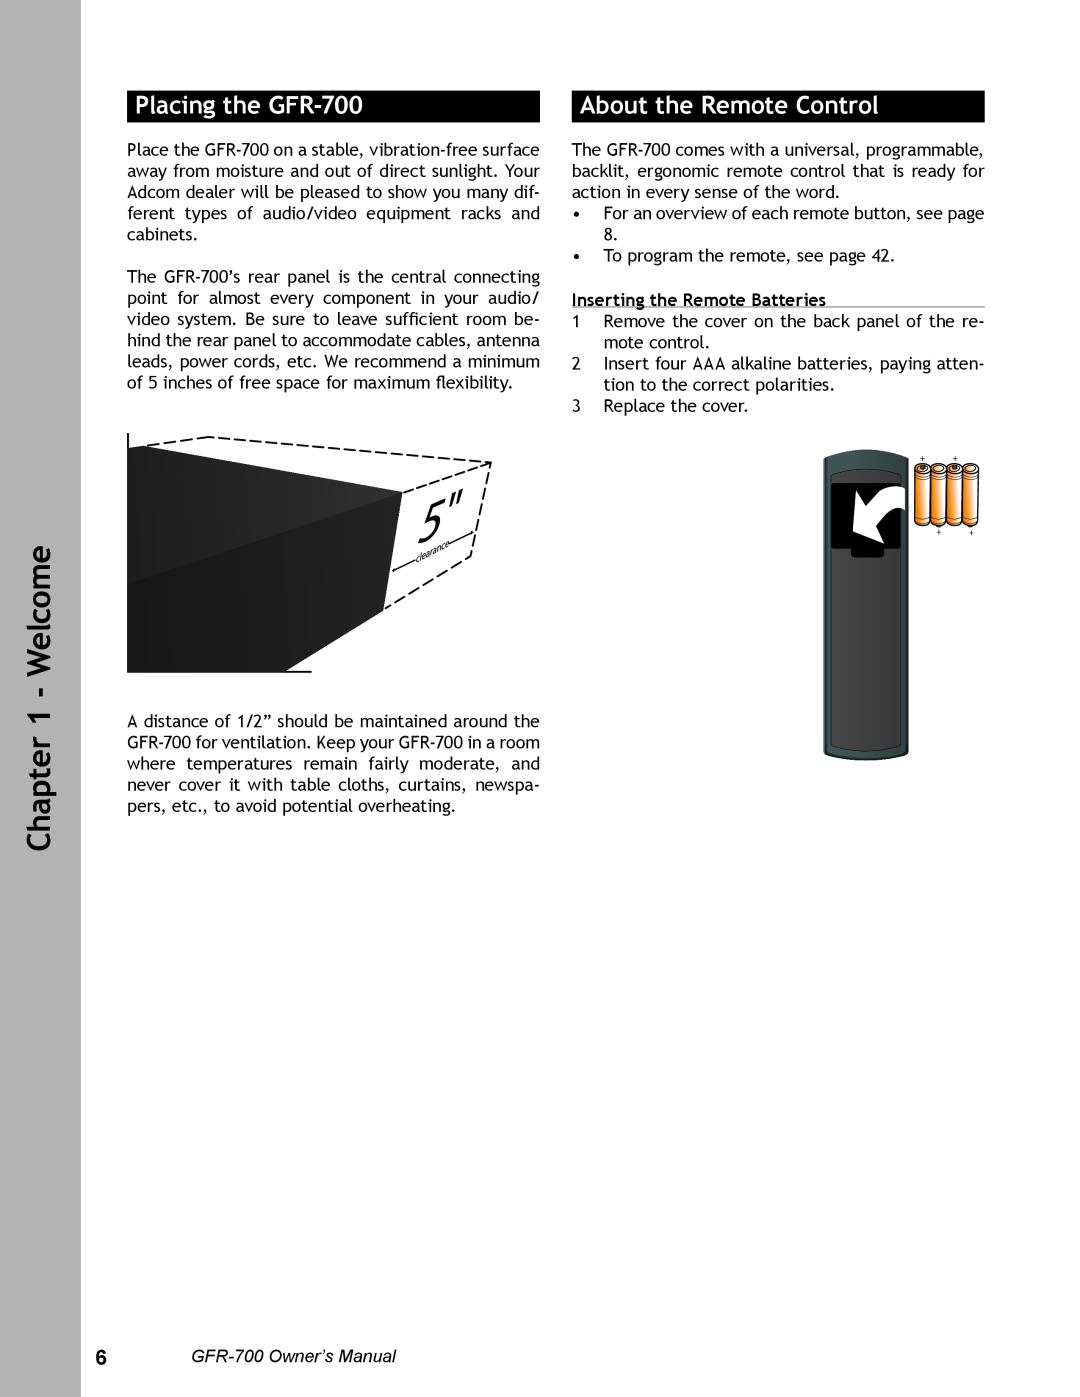 Adcom user manual Placing the GFR-700, About the Remote Control, Inserting the Remote Batteries, Welcome 